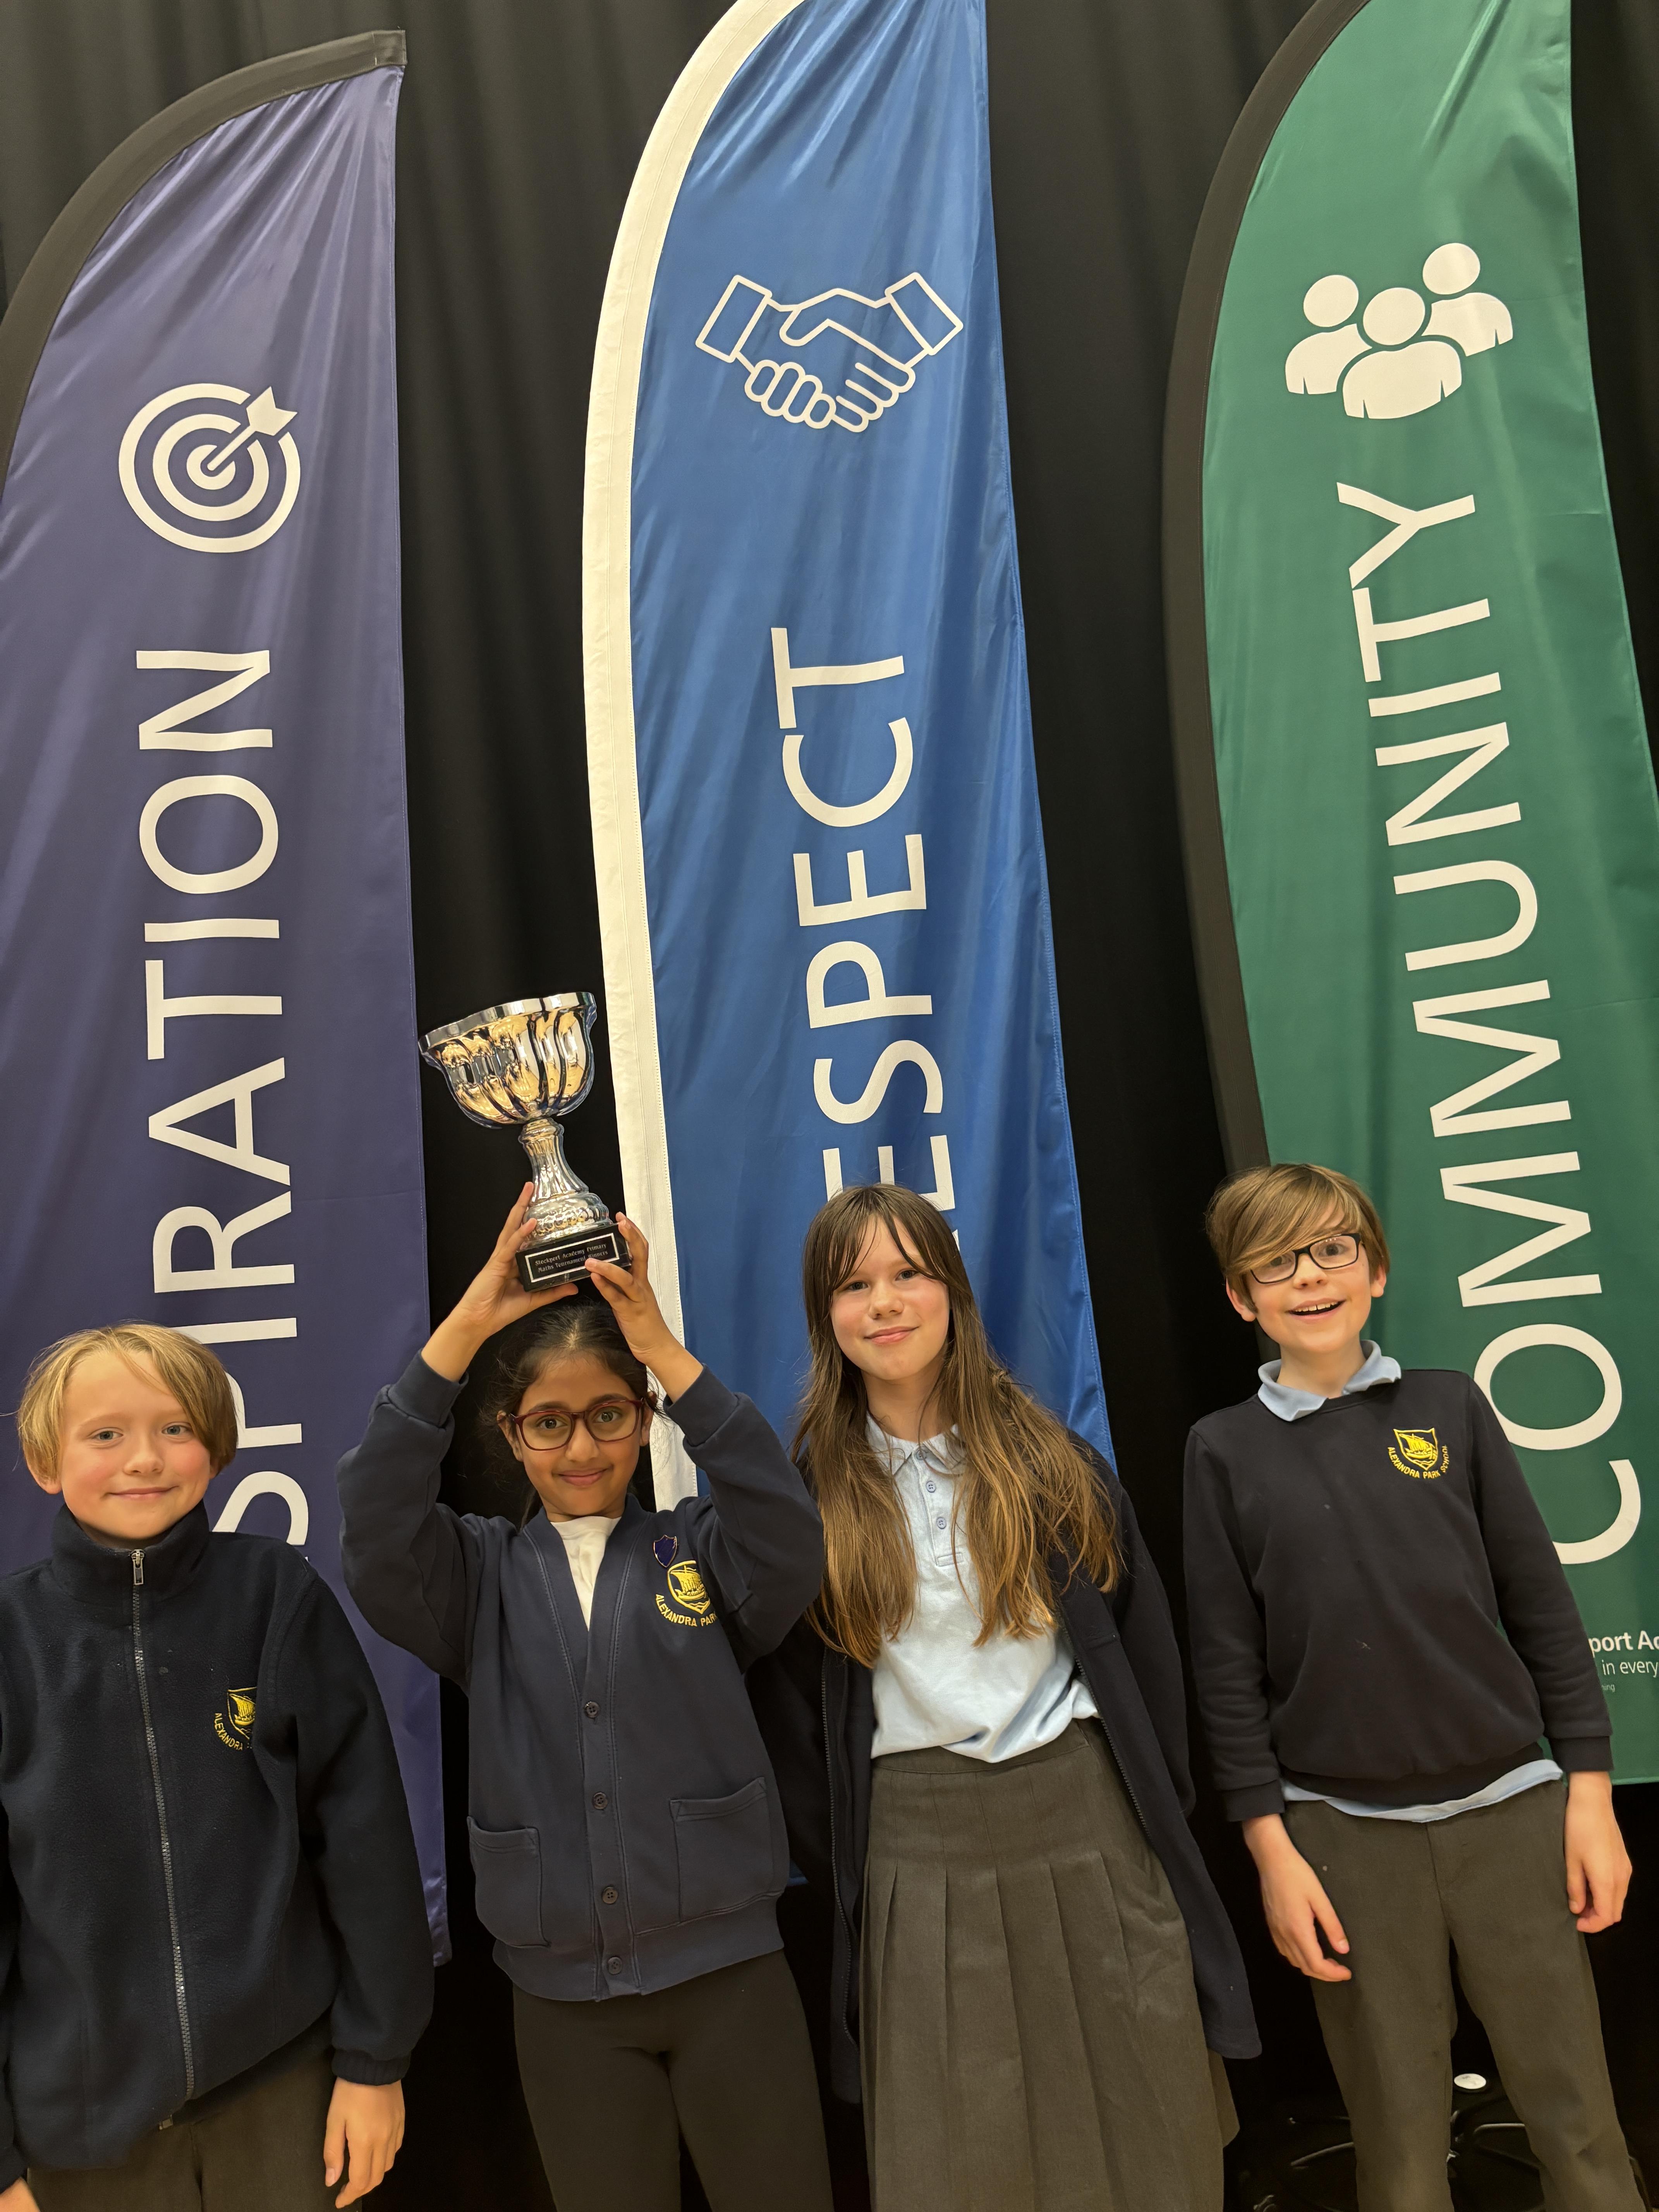 Primary Maths Tournament Adds Up To Another Success